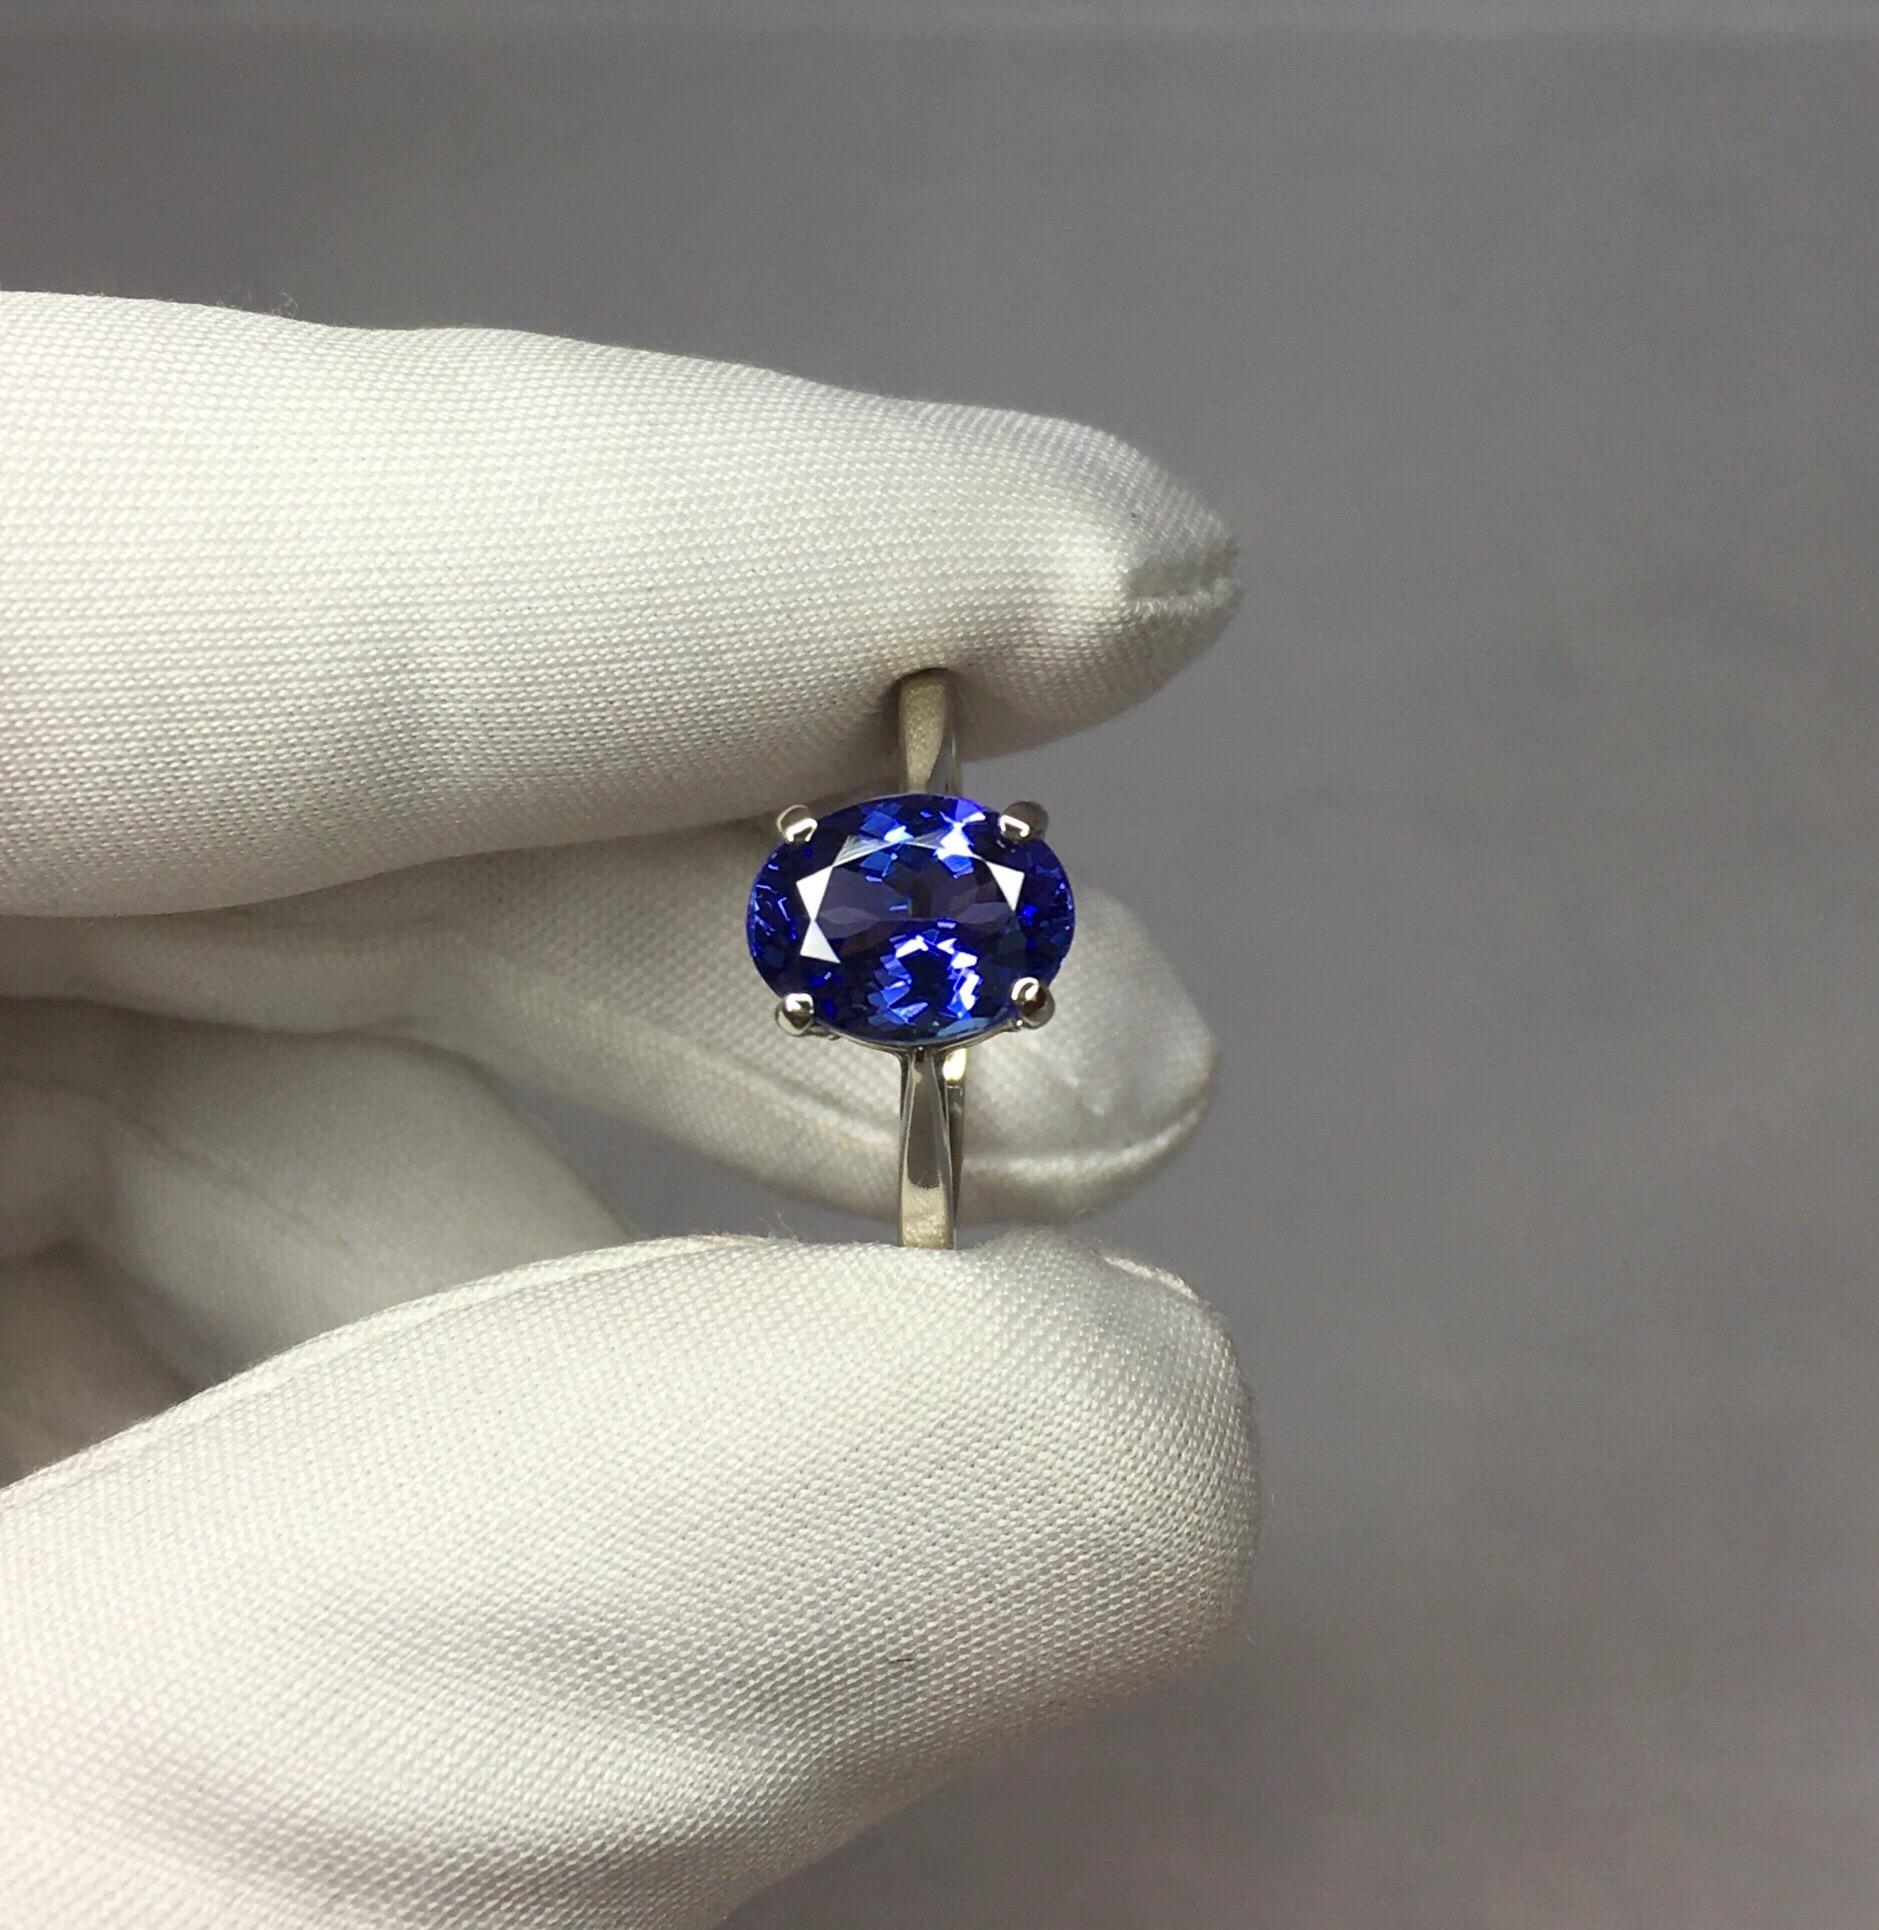 Fine natural vivid blue violet tanzanite set in a beautiful 14k white gold solitaire ring.

1.77 carat stone with stunning vivid blue violet colour and excellent clarity. Very clean stone, practically flawless.

Ring size K1/2. The ring is